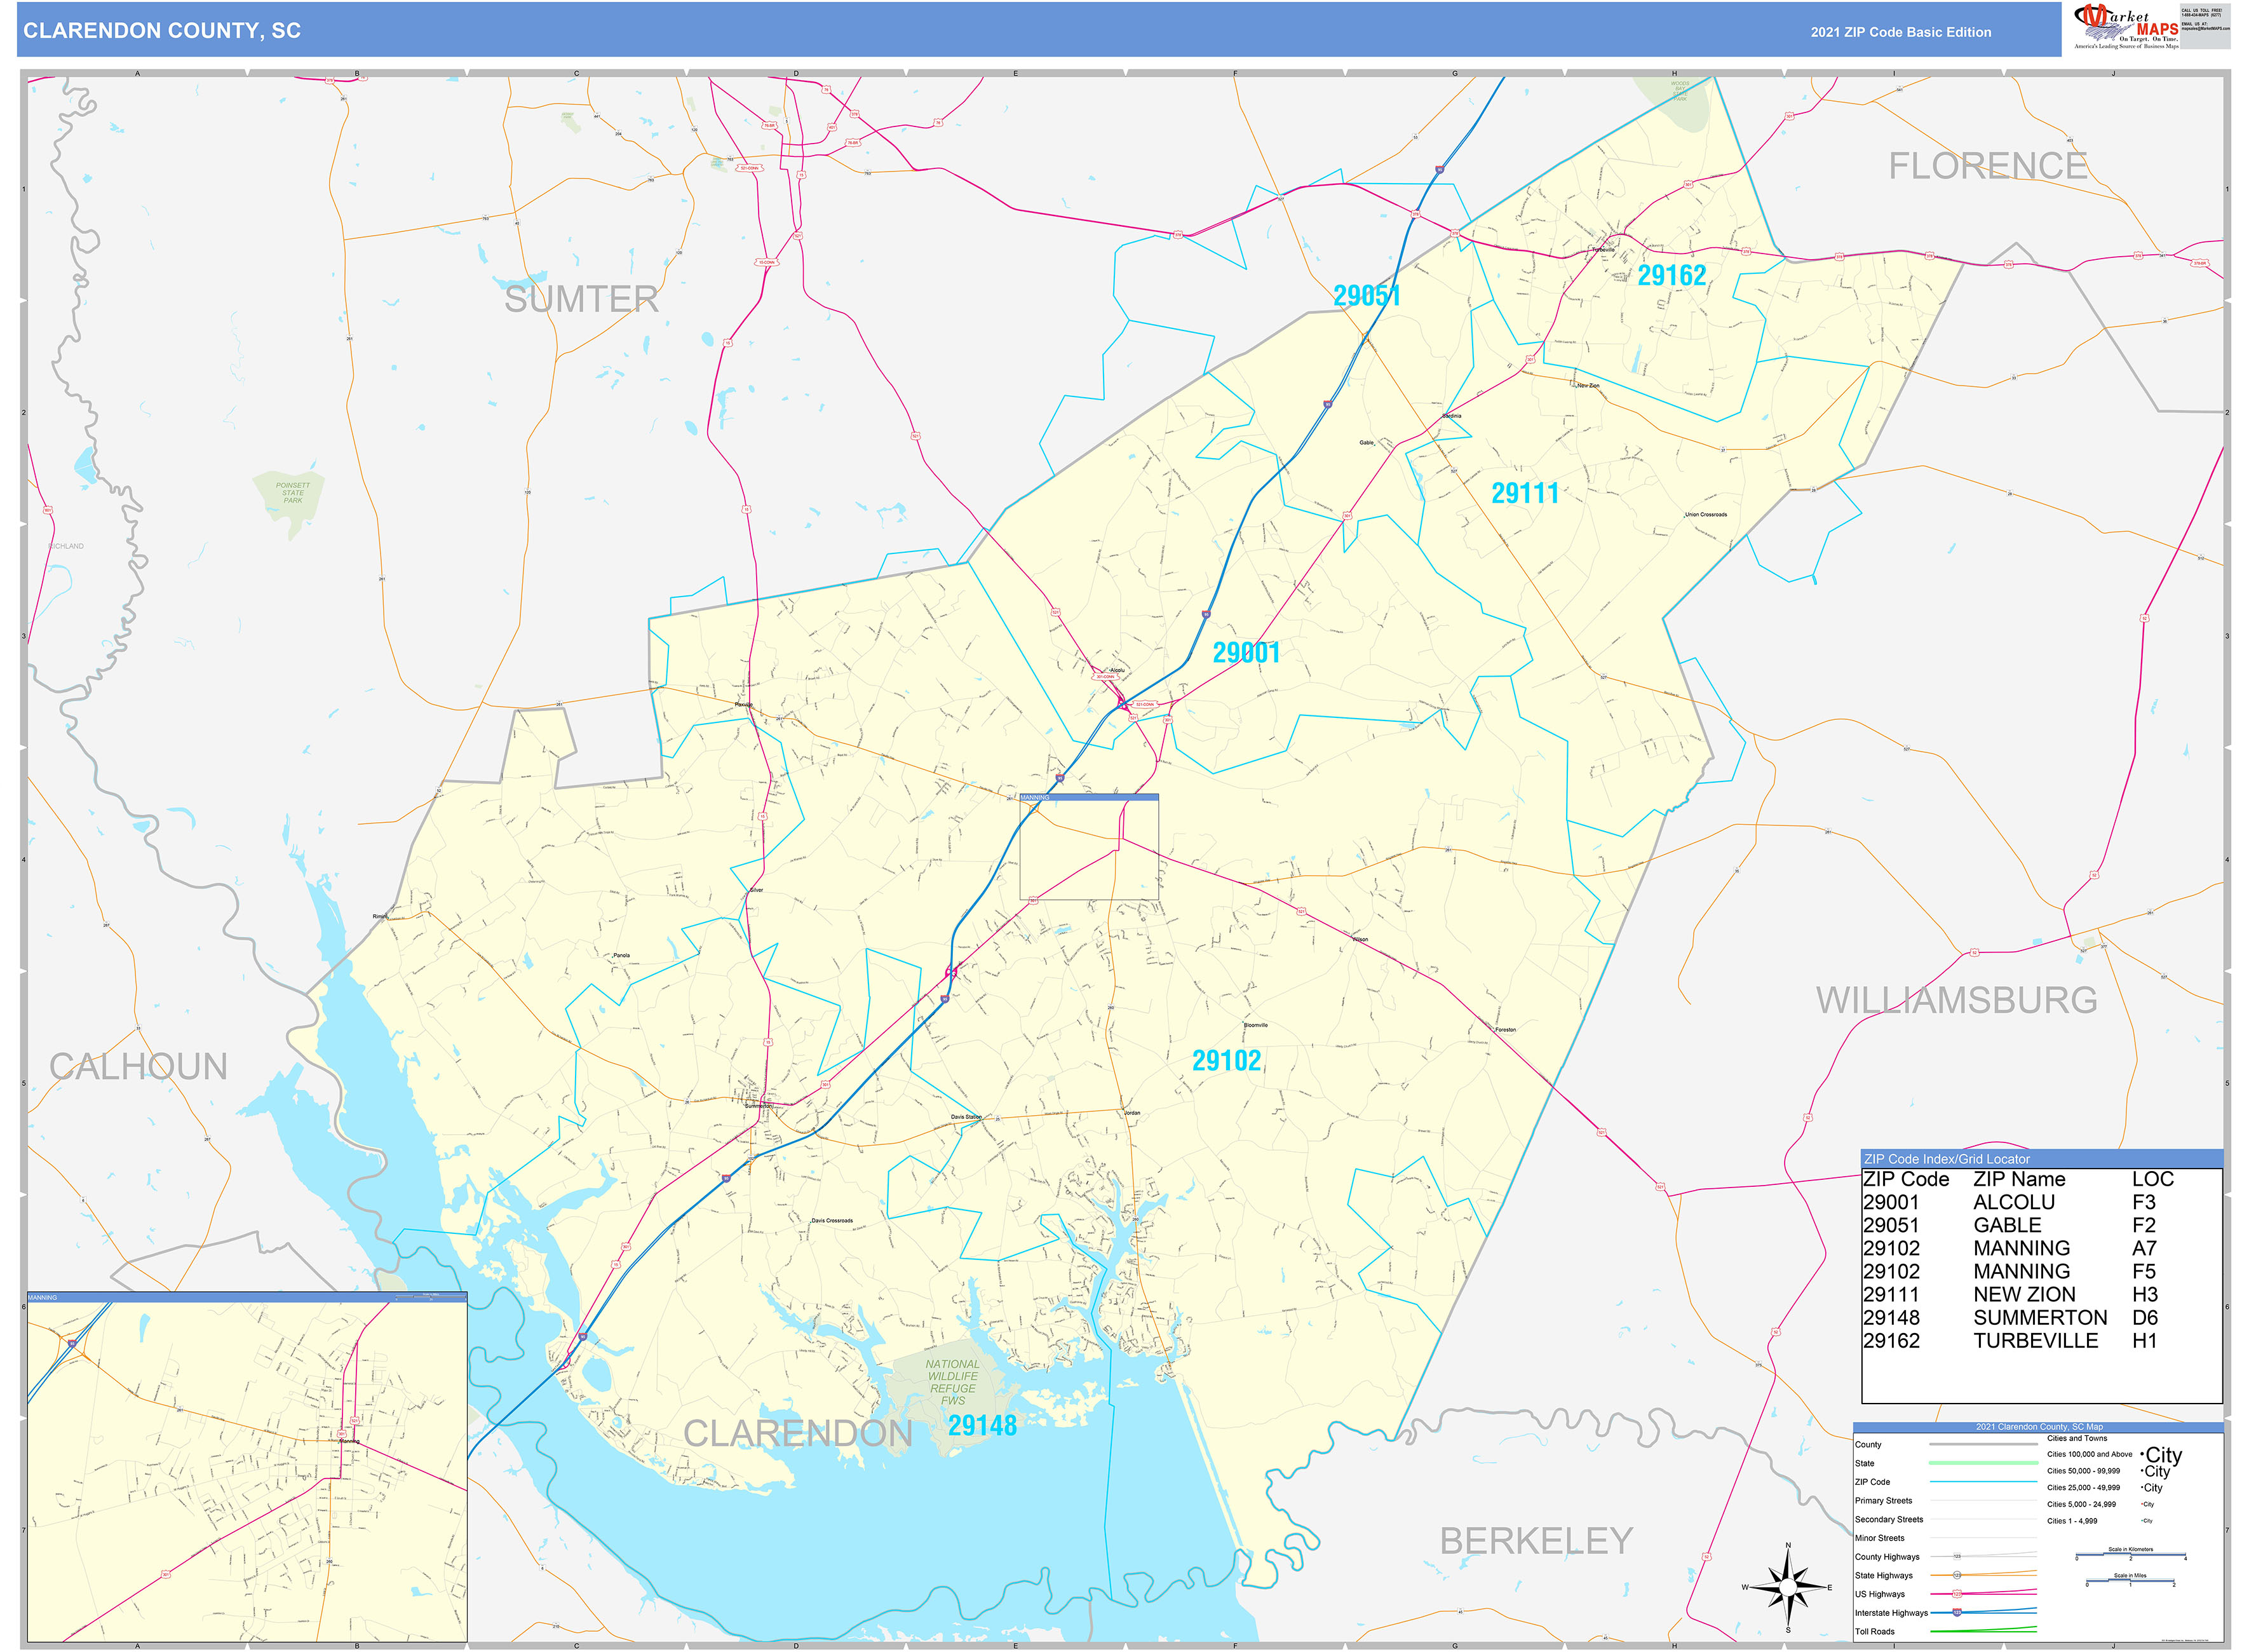 Clarendon County, SC Zip Code Wall Map Basic Style by MarketMAPS - MapSales